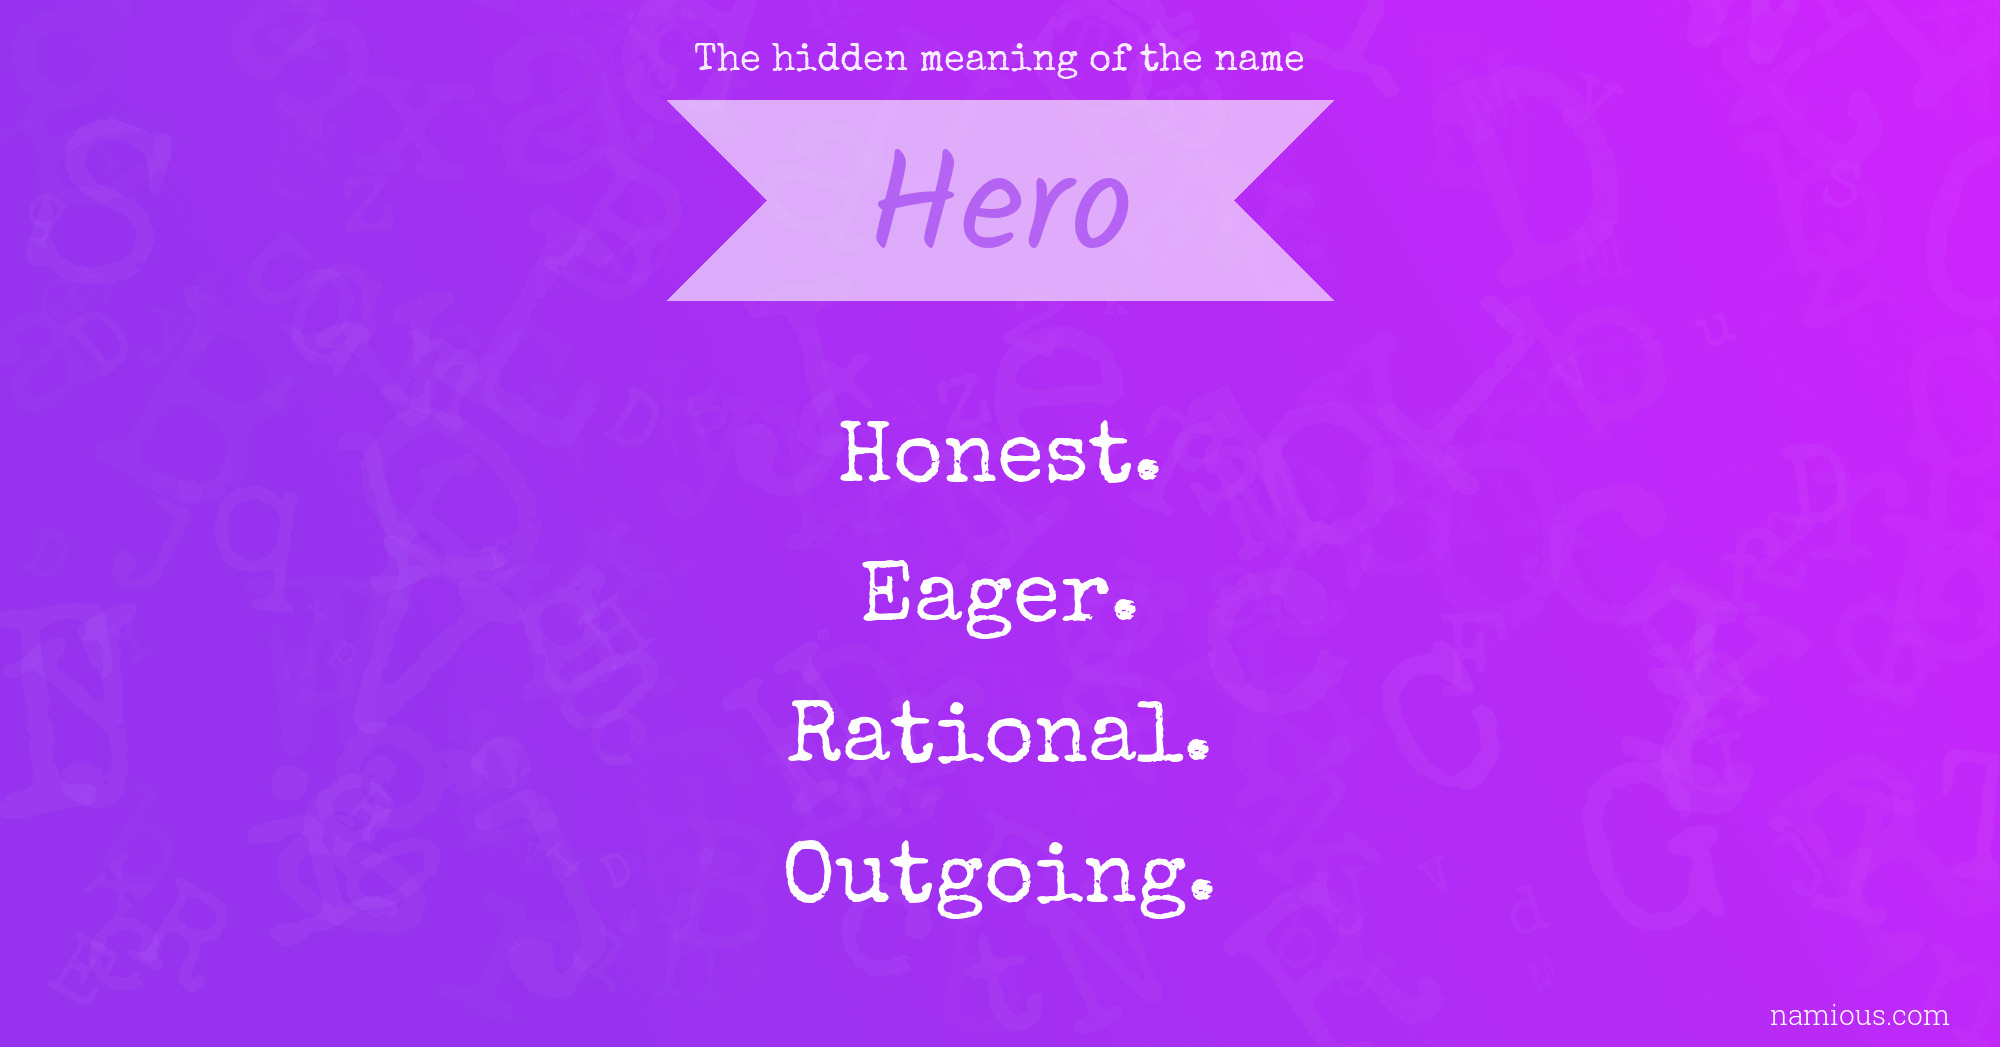 The hidden meaning of the name Hero